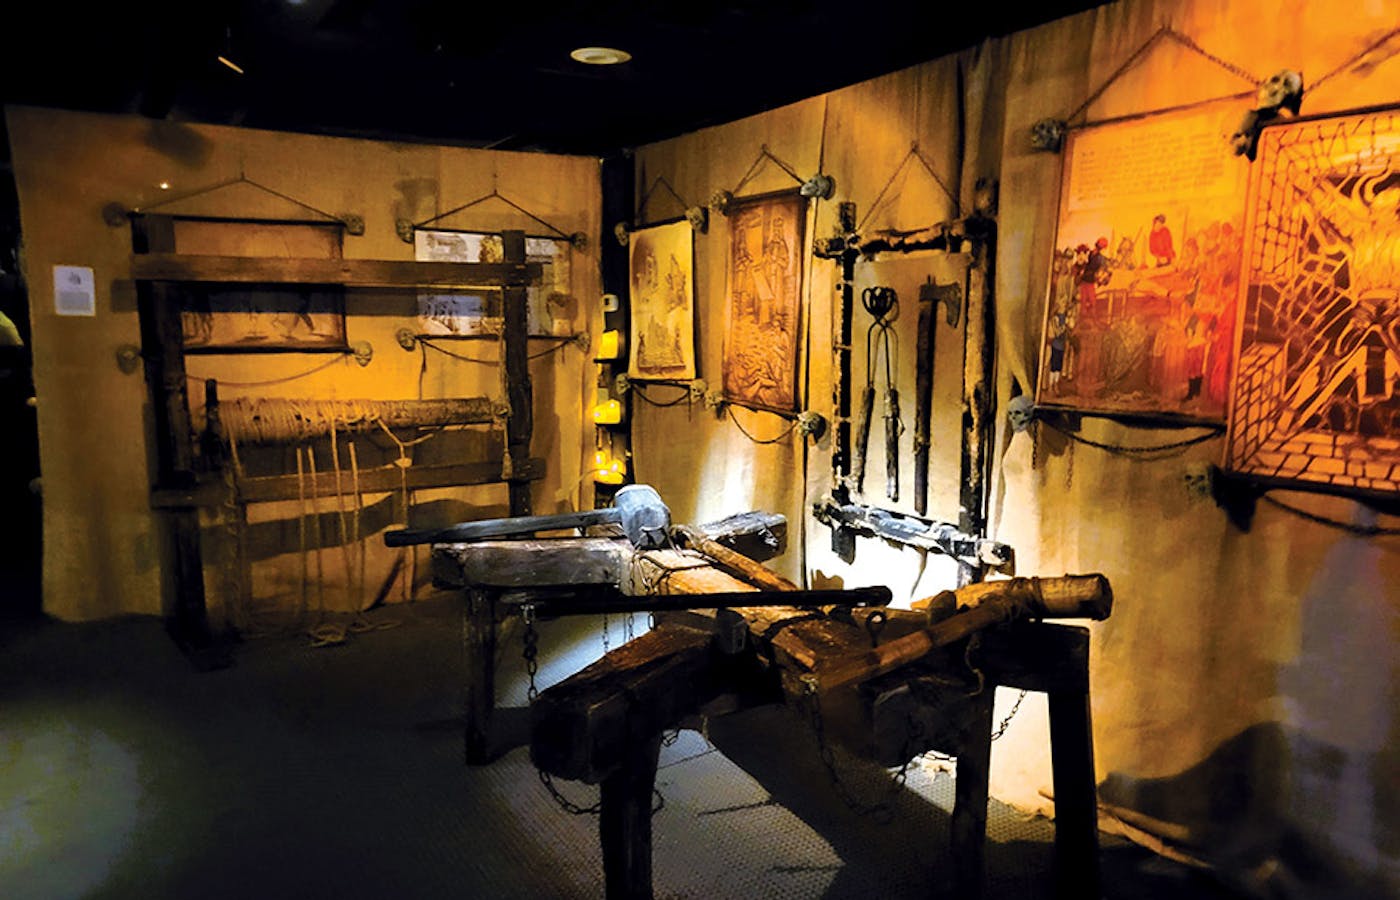 Torture instruments at the Medieval Torture Museum in Chicago, Illinois (photo courtesy of Medieval Torture Museum)